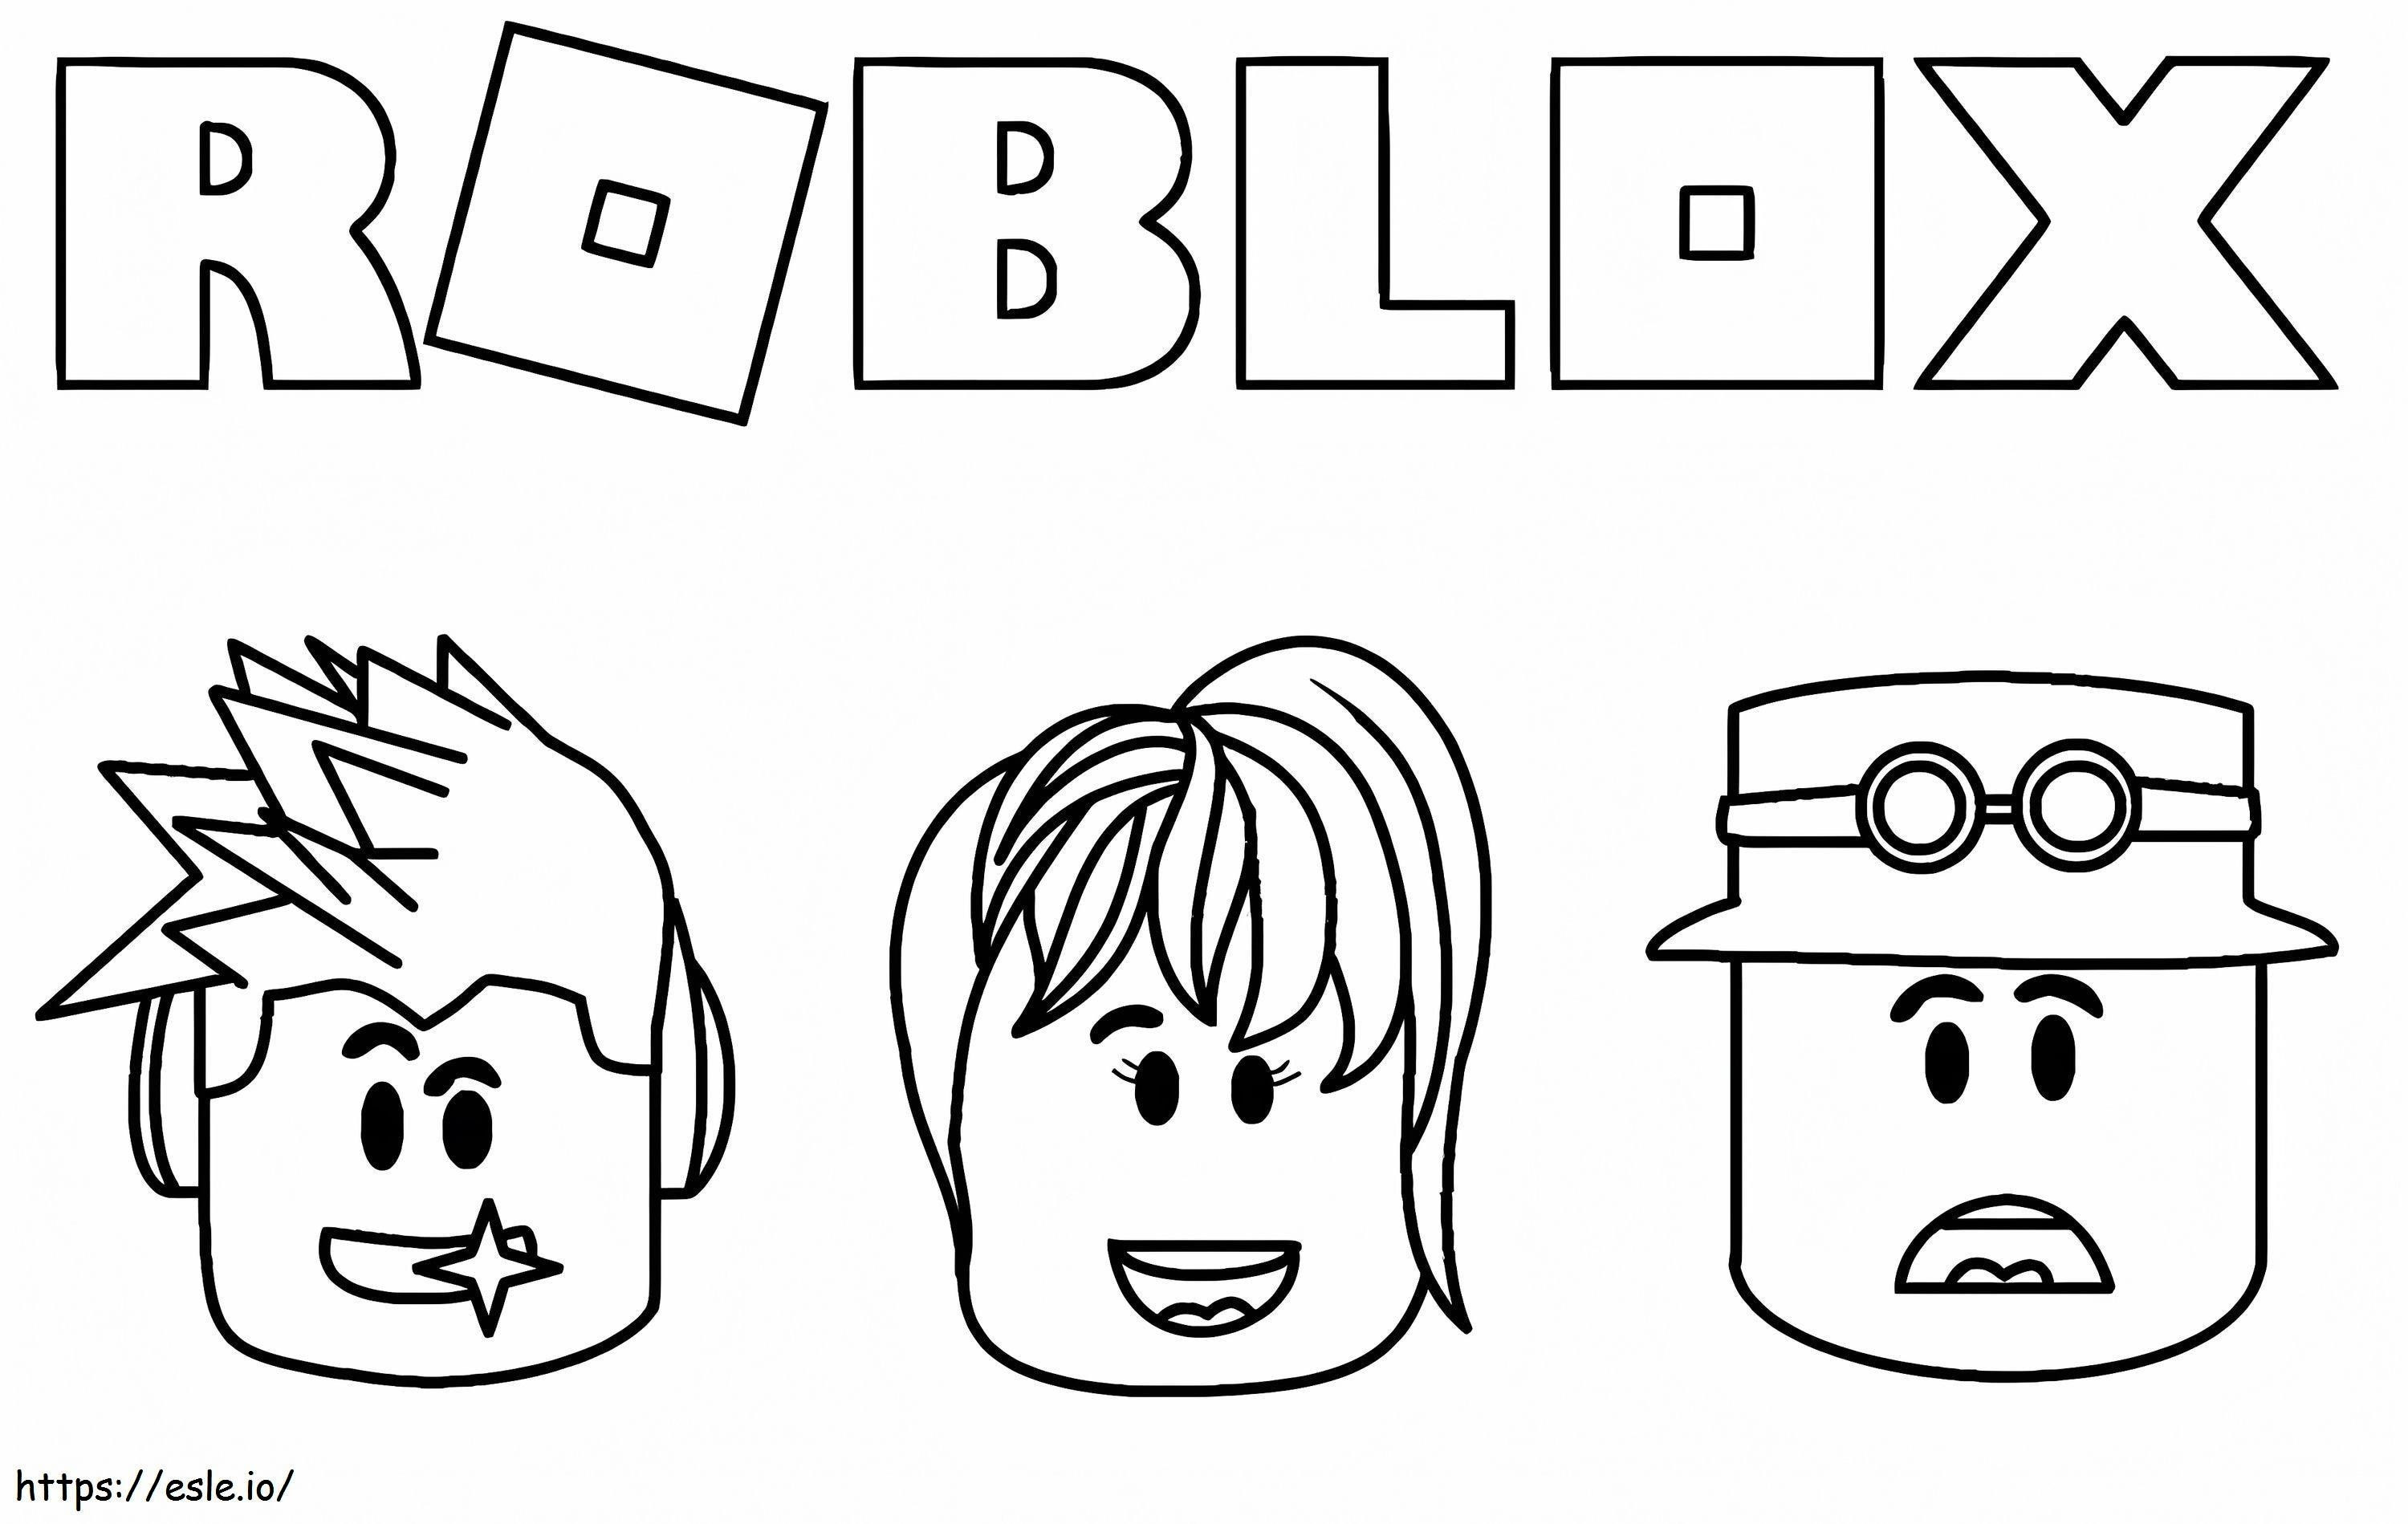 Roblox Heads coloring page